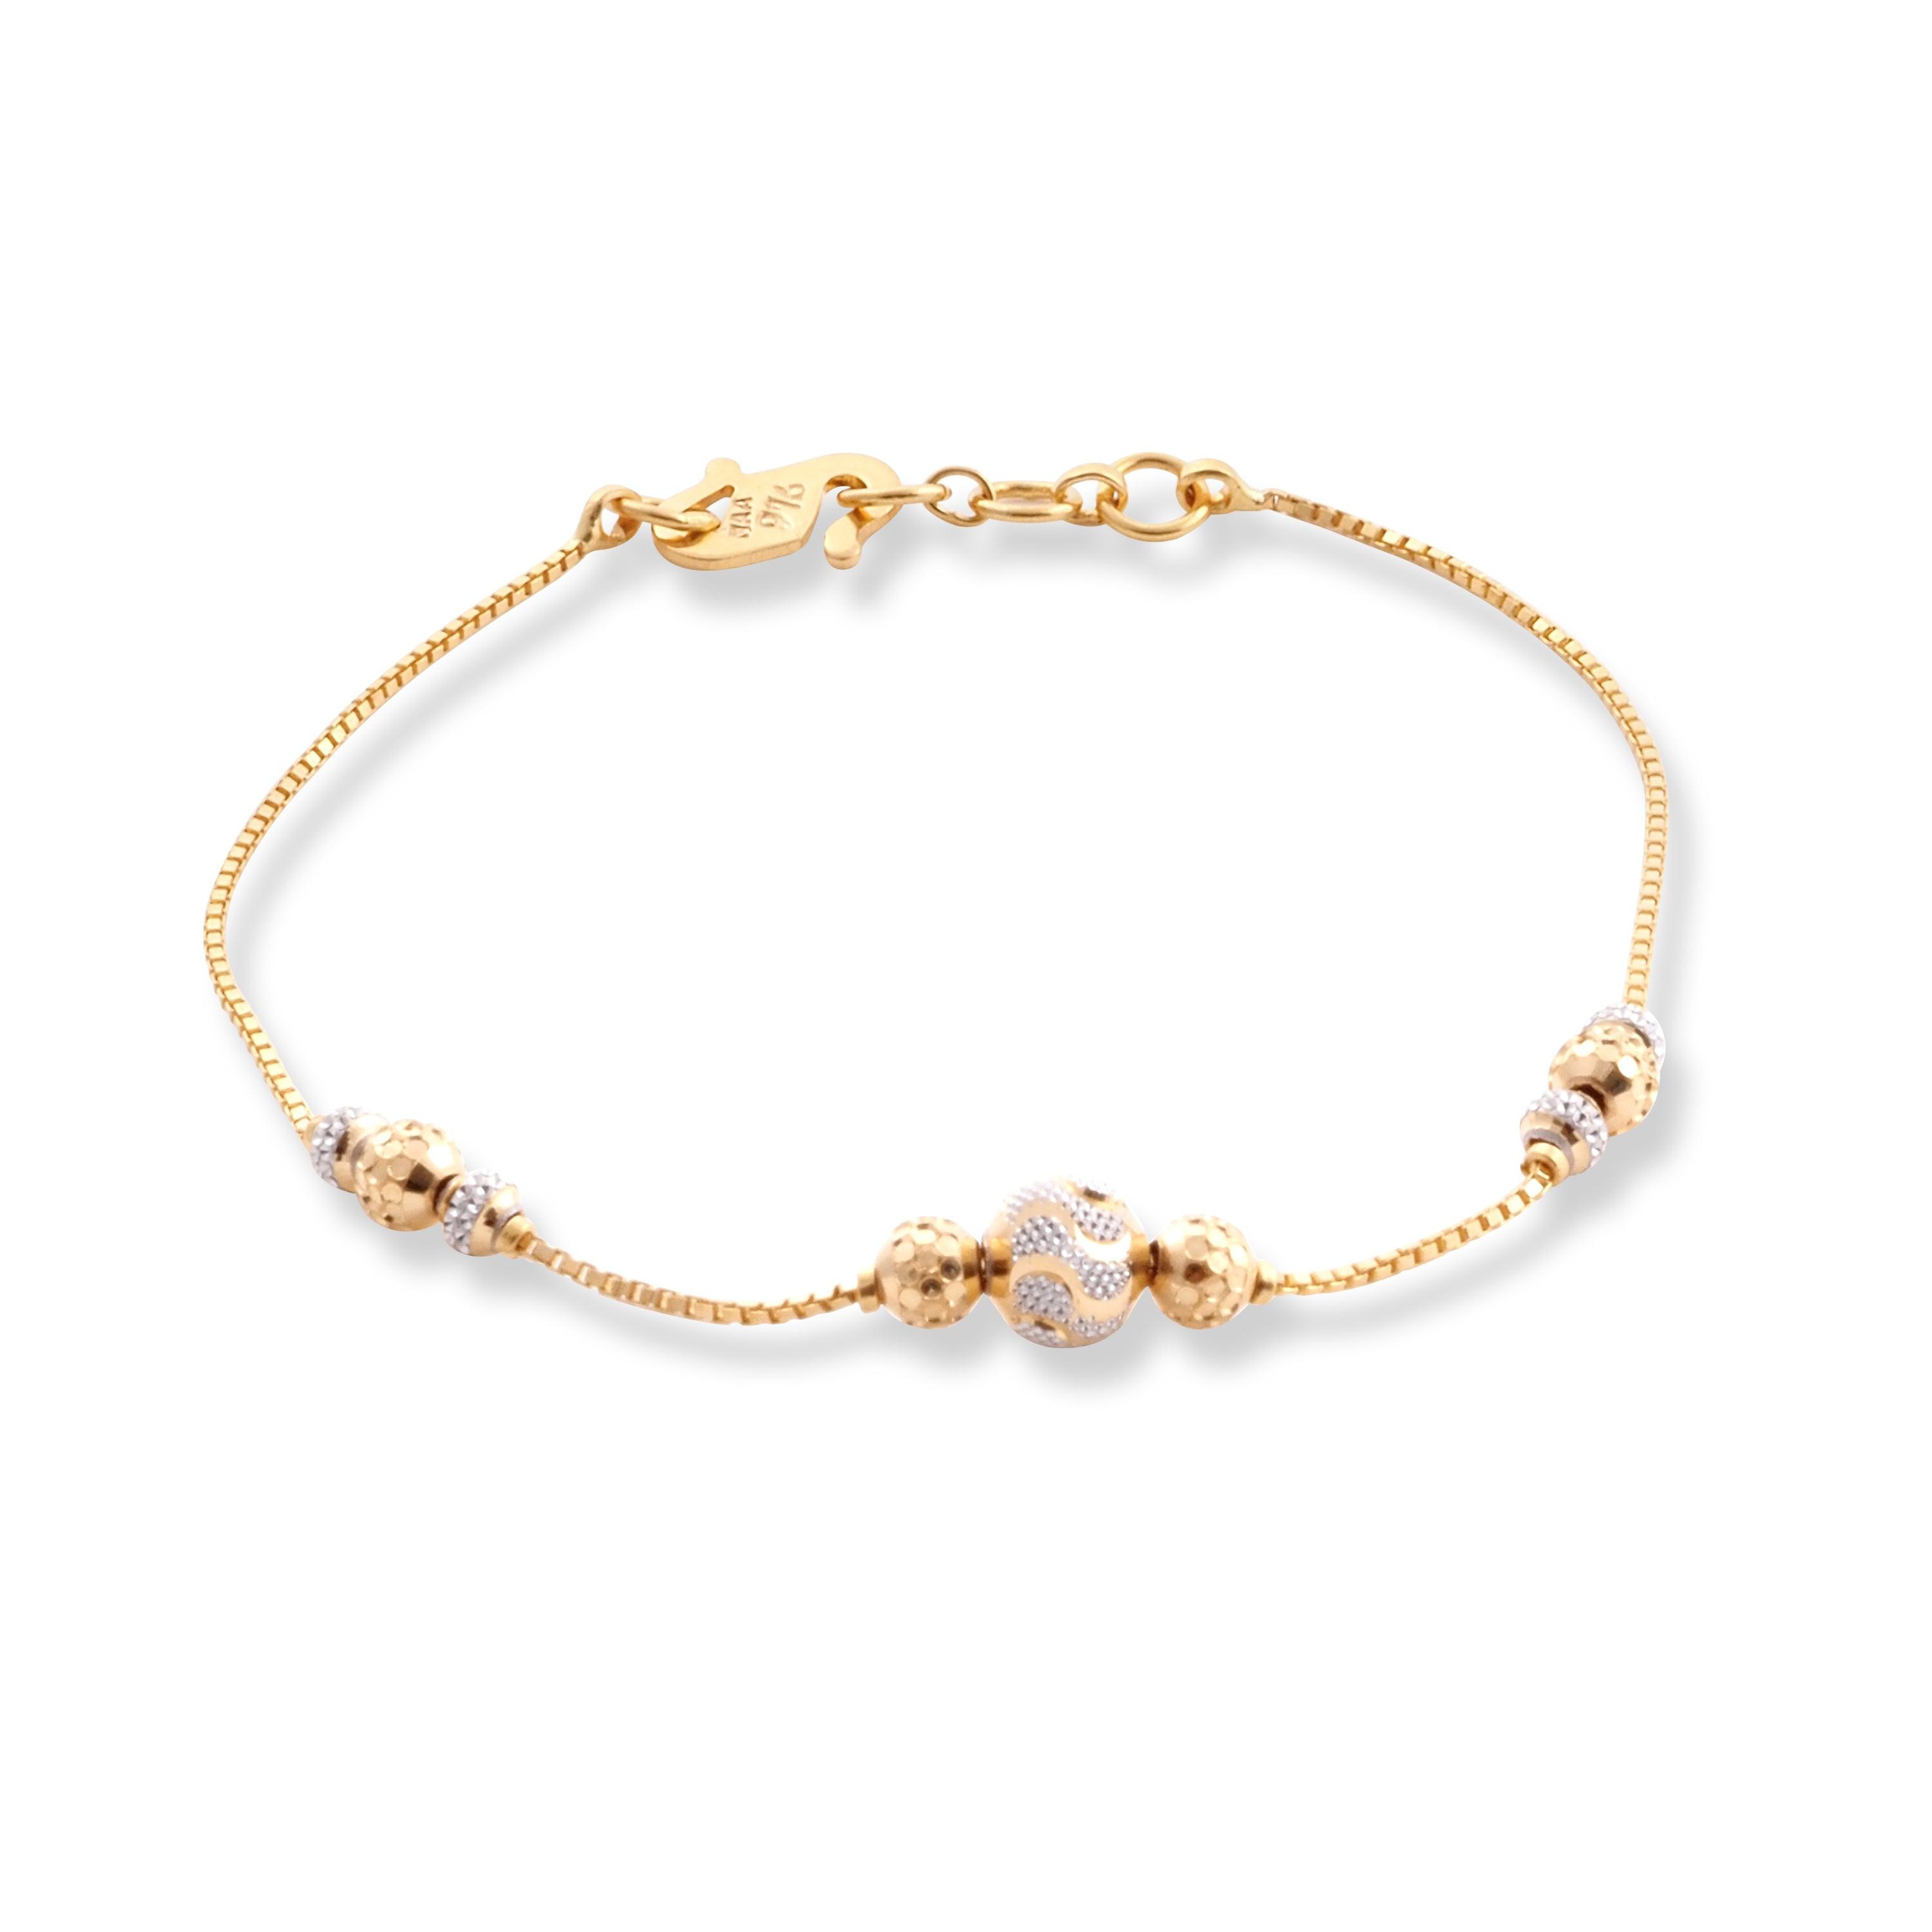 22ct Yellow Gold Bracelet in Rhodium Plating Beads with ''S'' Clasp LBR-8504 - Minar Jewellers